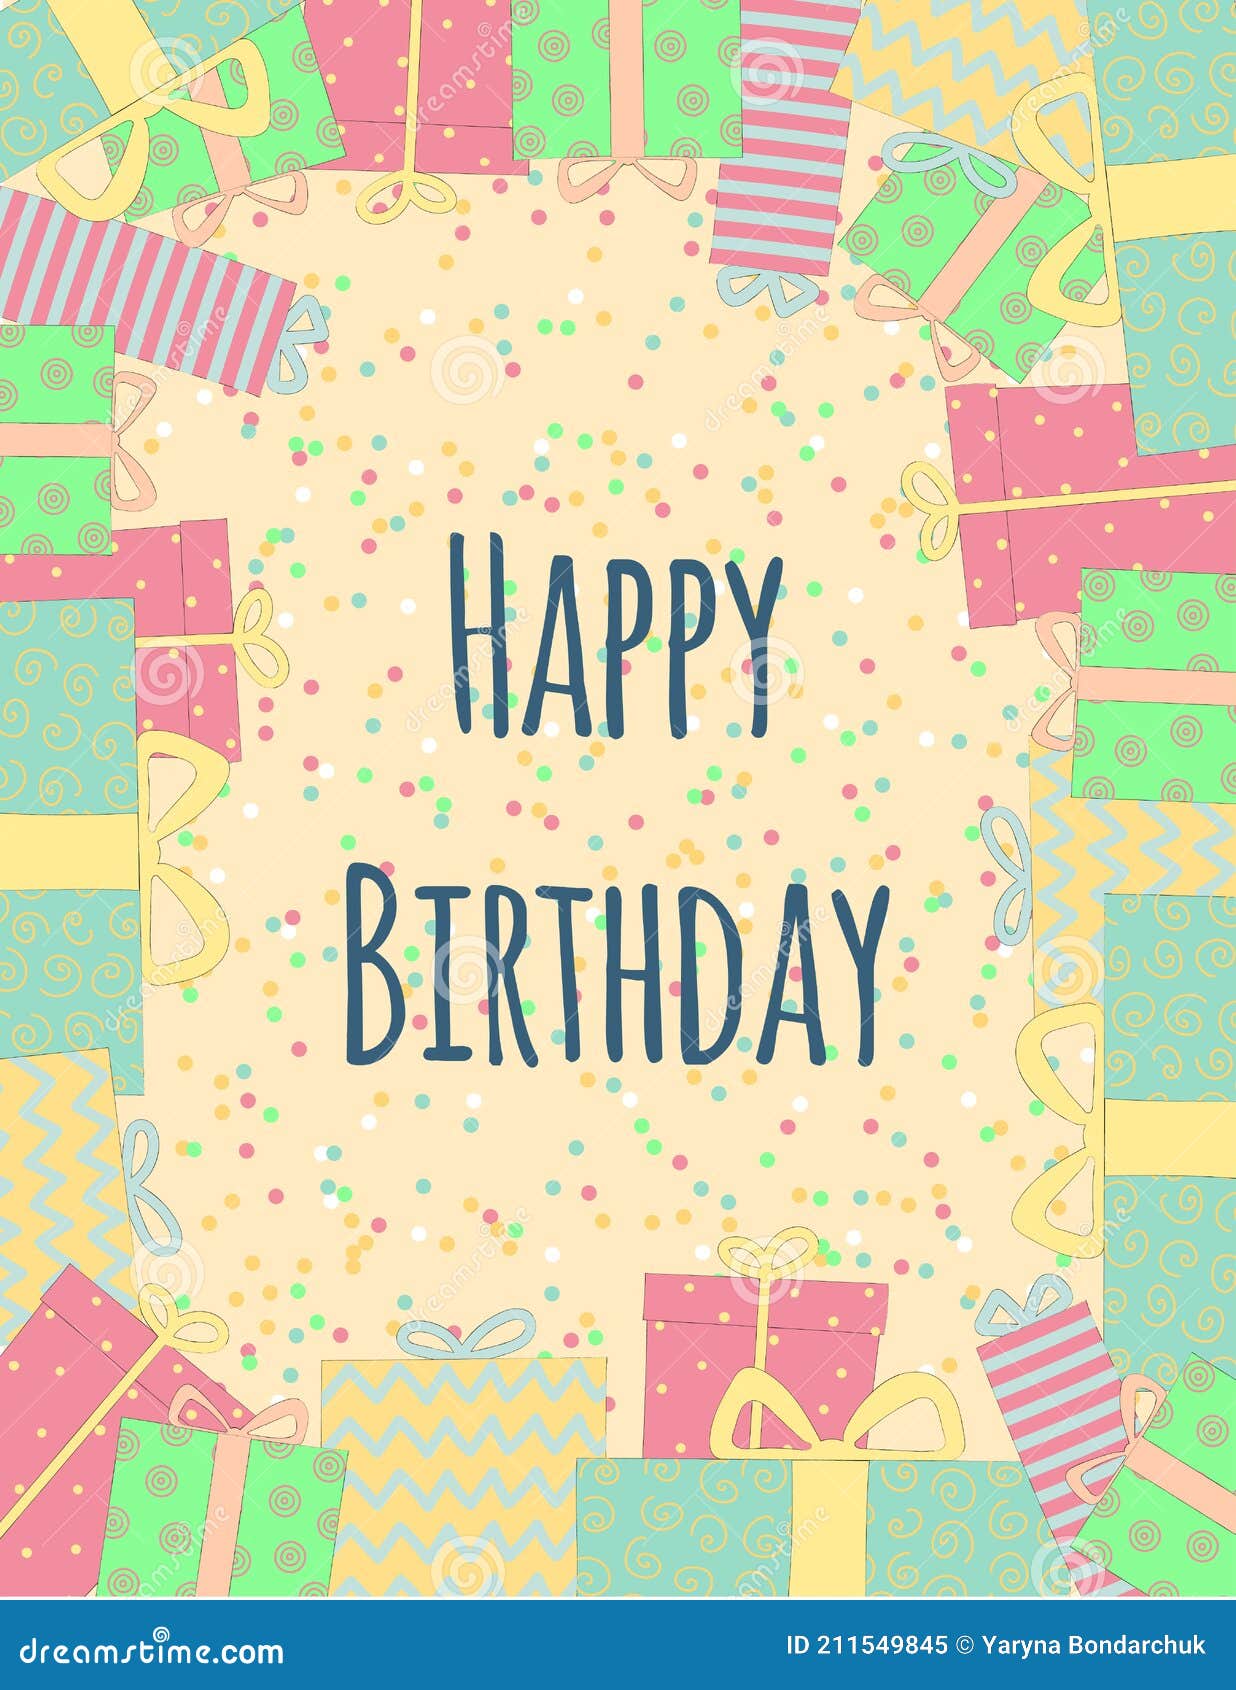 Happy Birthday Greeting Card. Colorful Illustration with Presents Stock ...